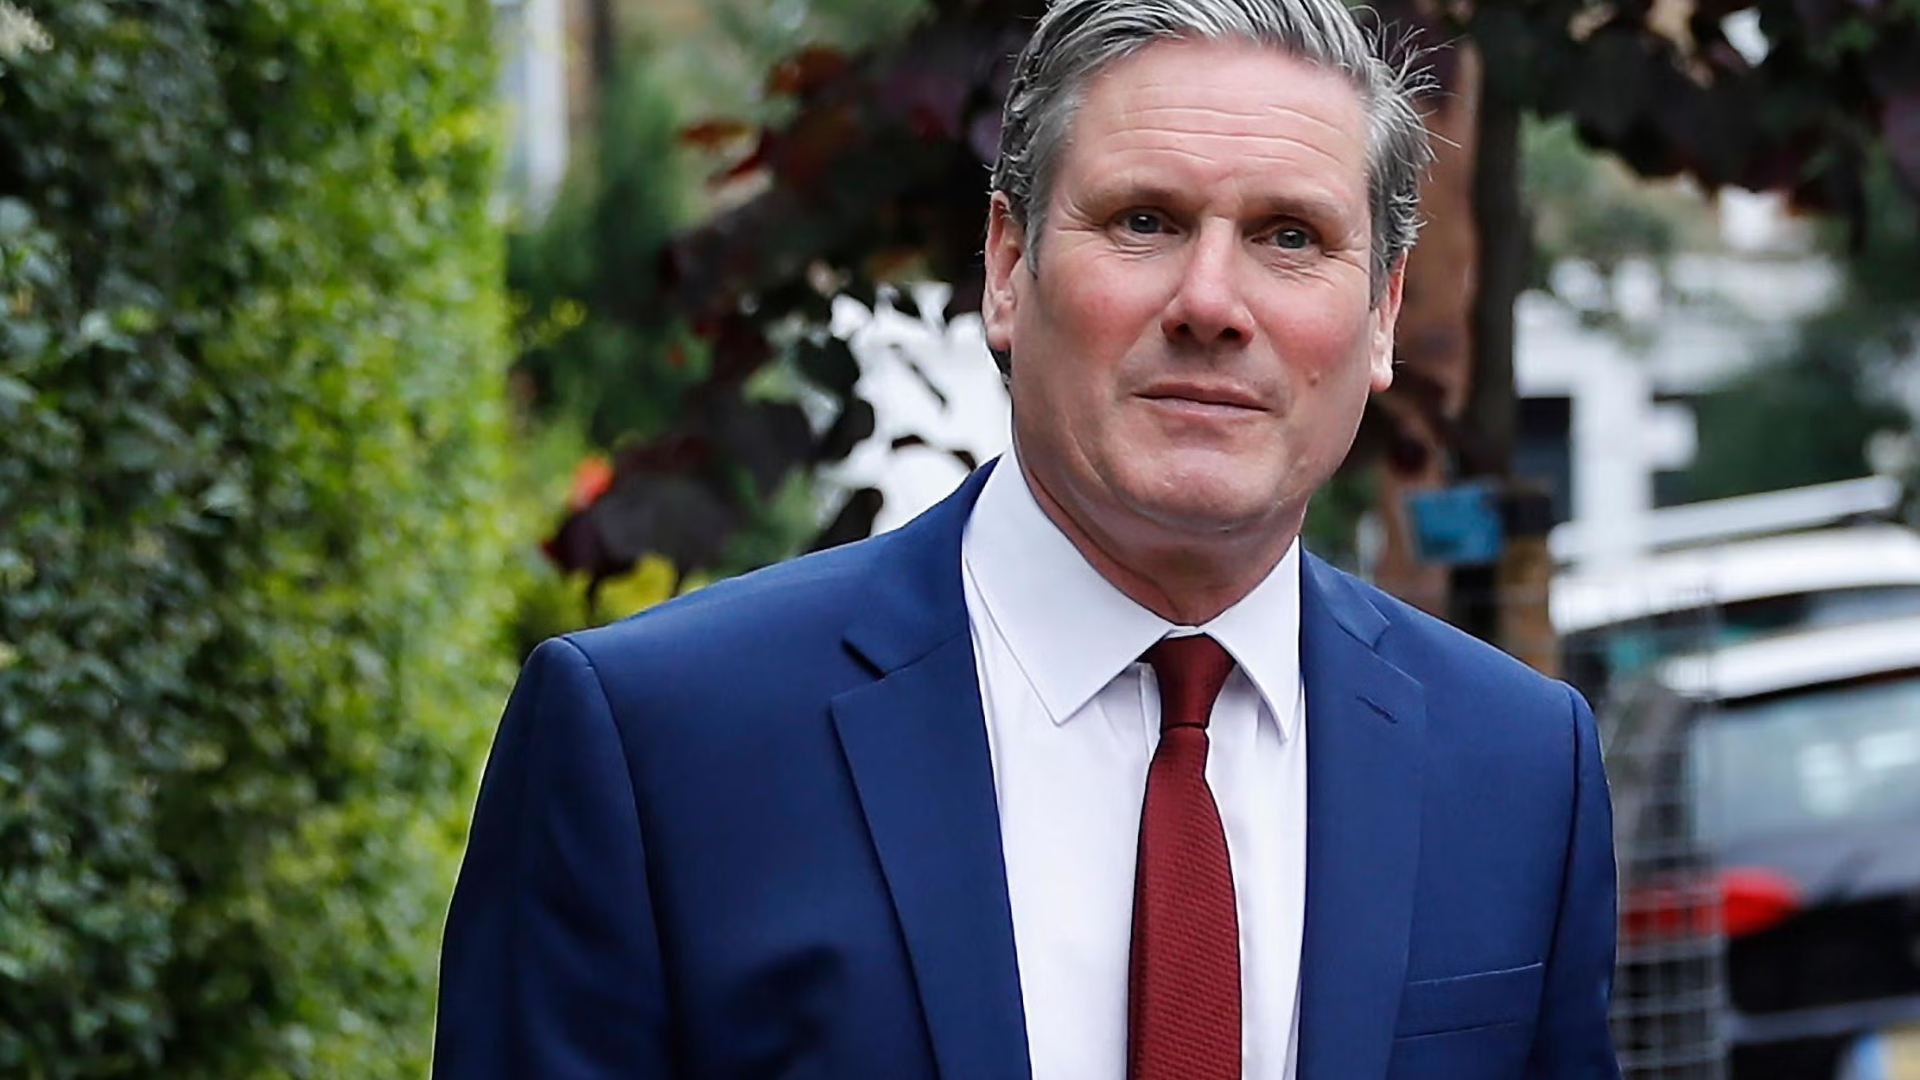 From Working Class Roots To Labour Leadership: Who Is Keir Starmer?